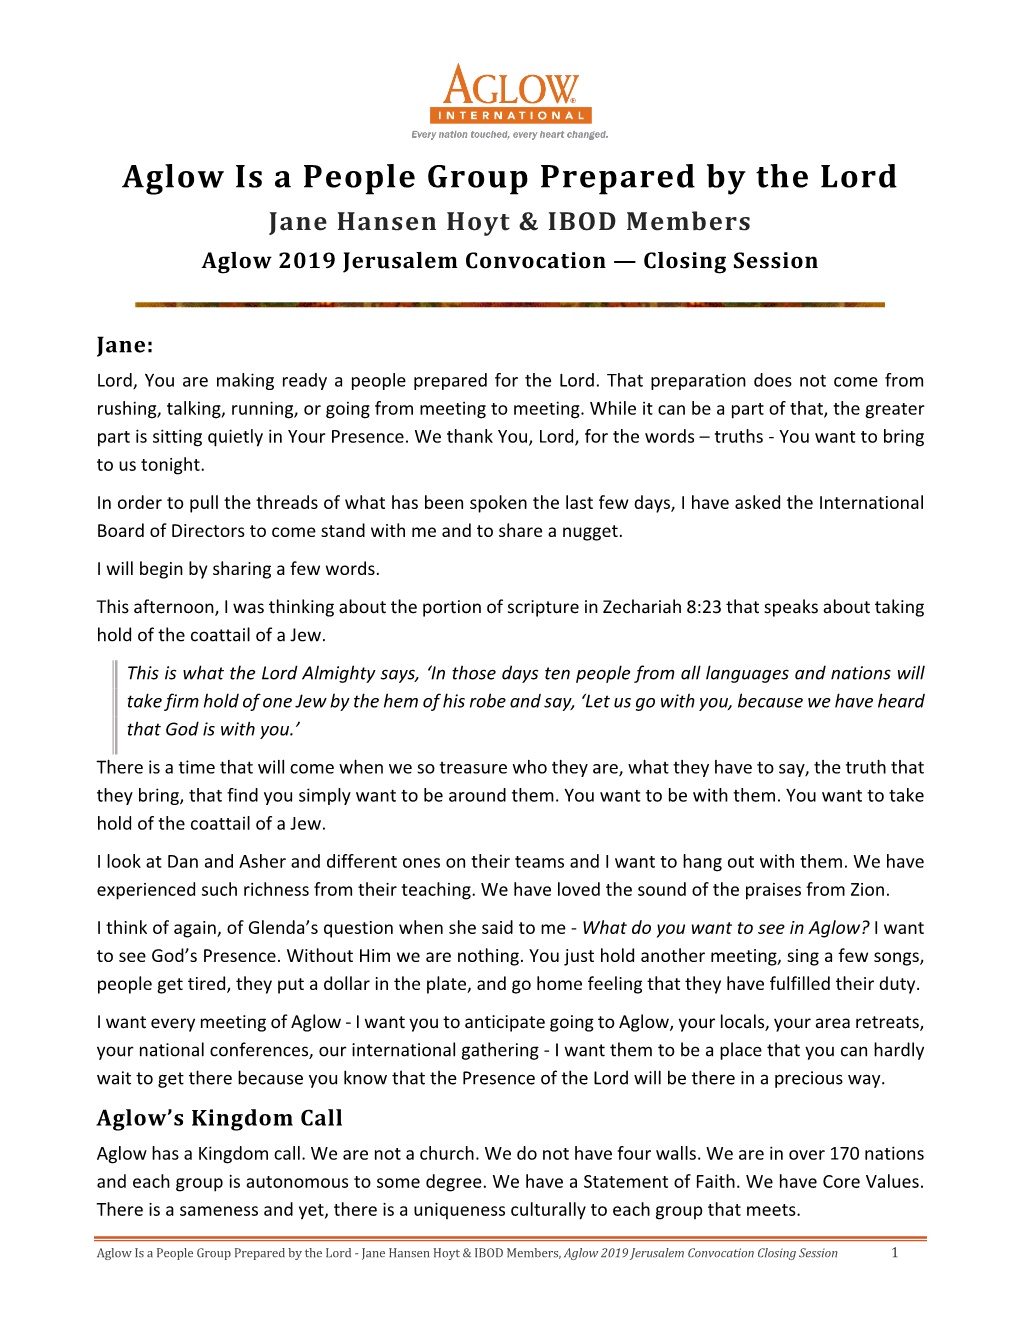 Aglow Is a People Group Prepared by the Lord Jane Hansen Hoyt & IBOD Members Aglow 2019 Jerusalem Convocation — Closing Session